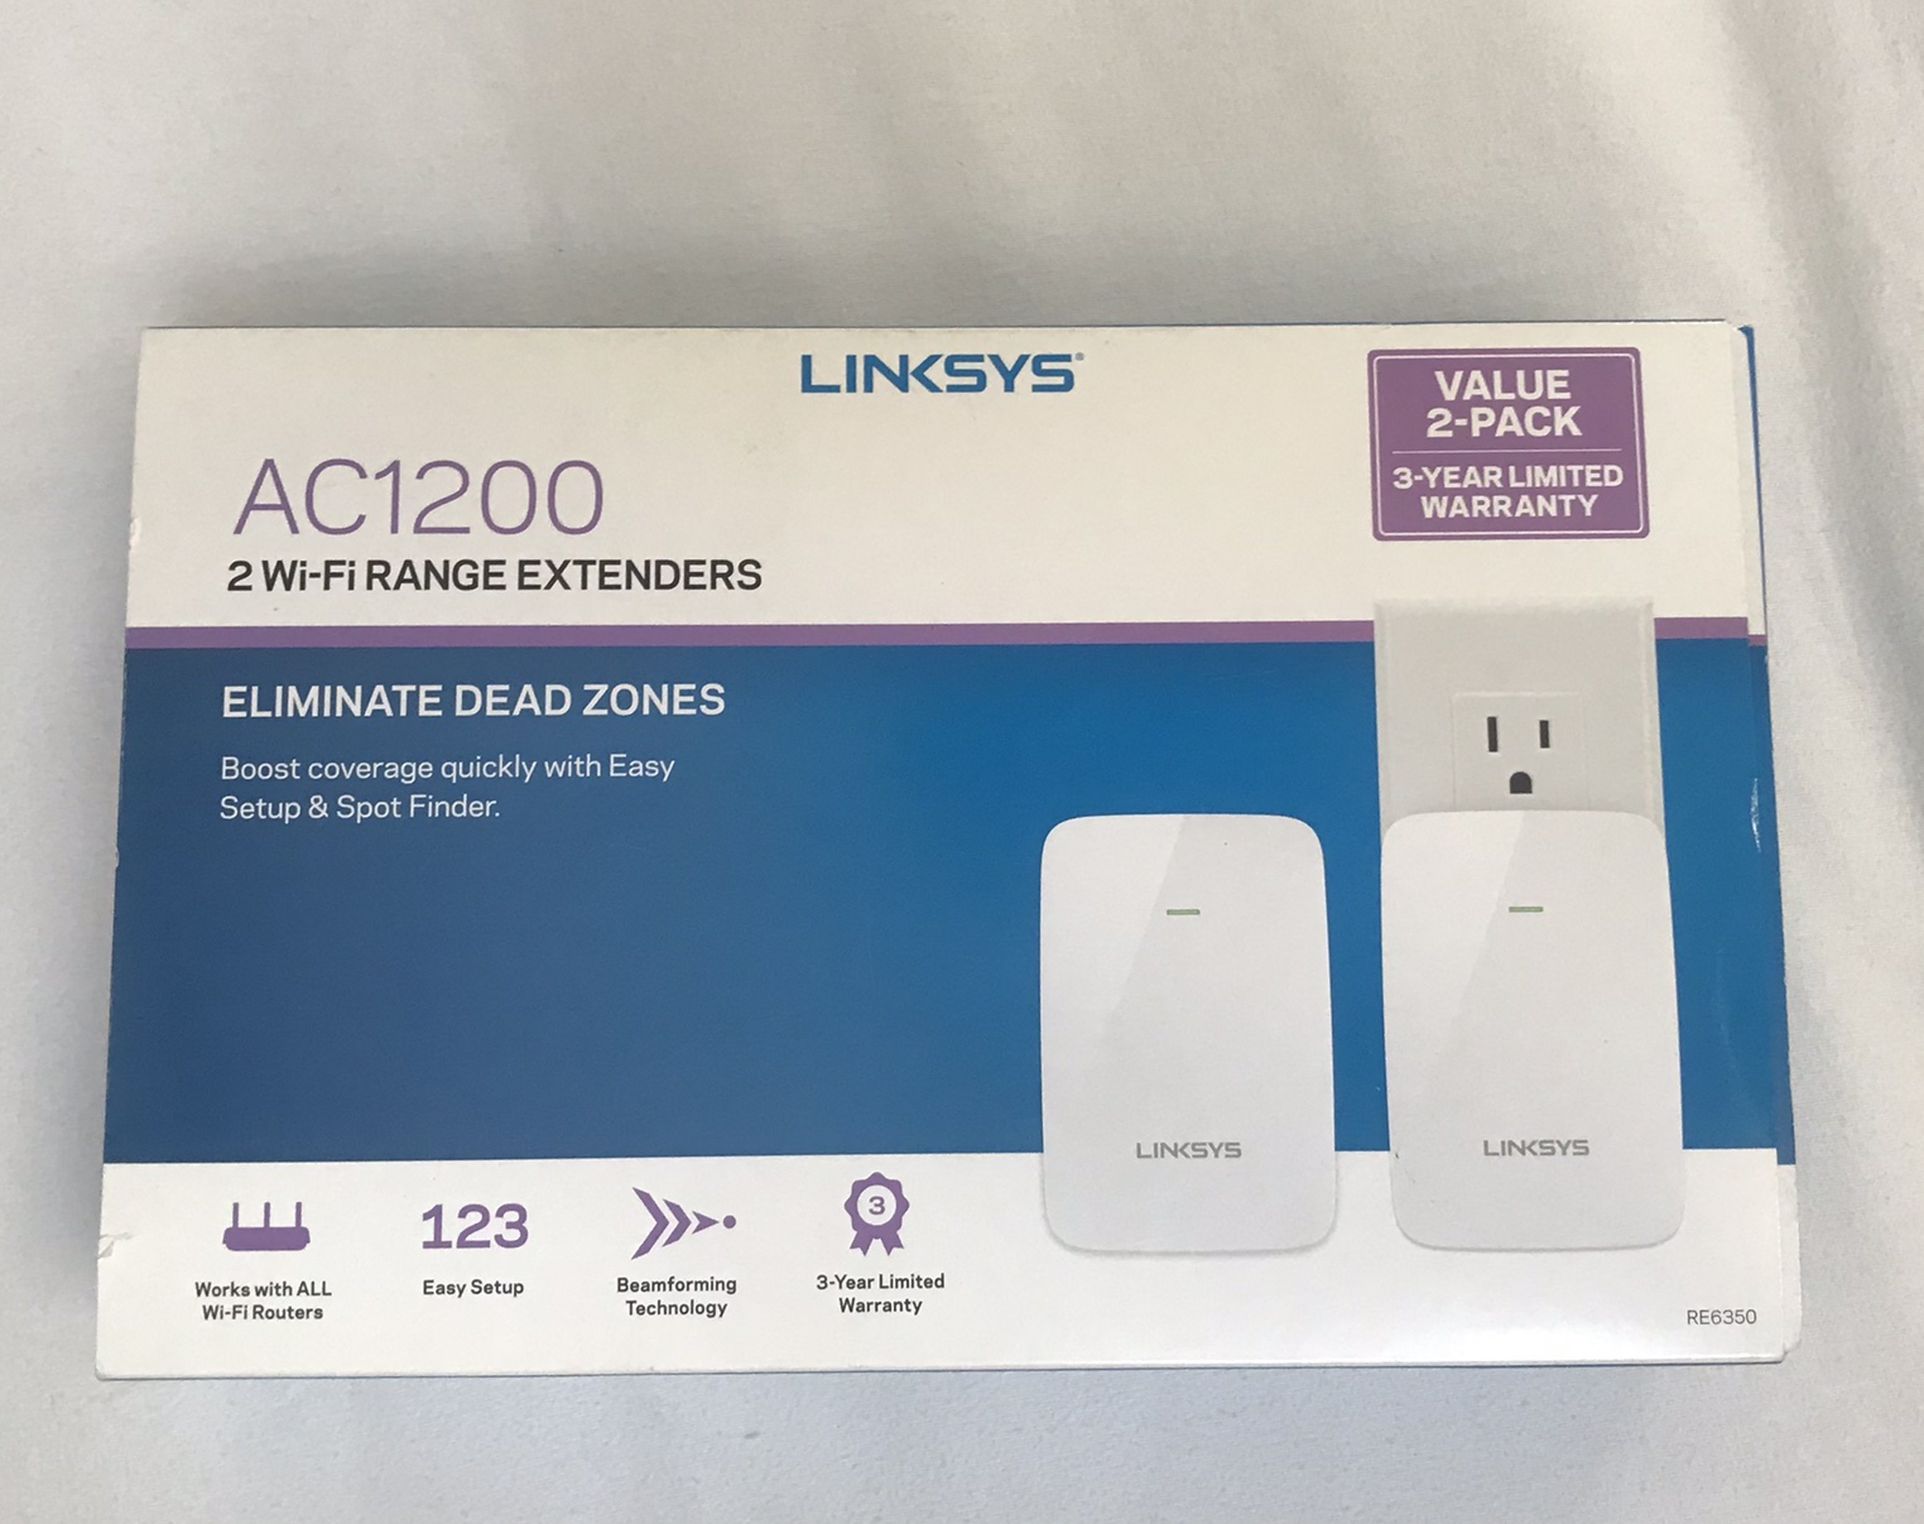 Linksys AC1200 Dual-Band Wi-Fi Range Extender/Wi-Fi Booster (RE6350), 2 Pack